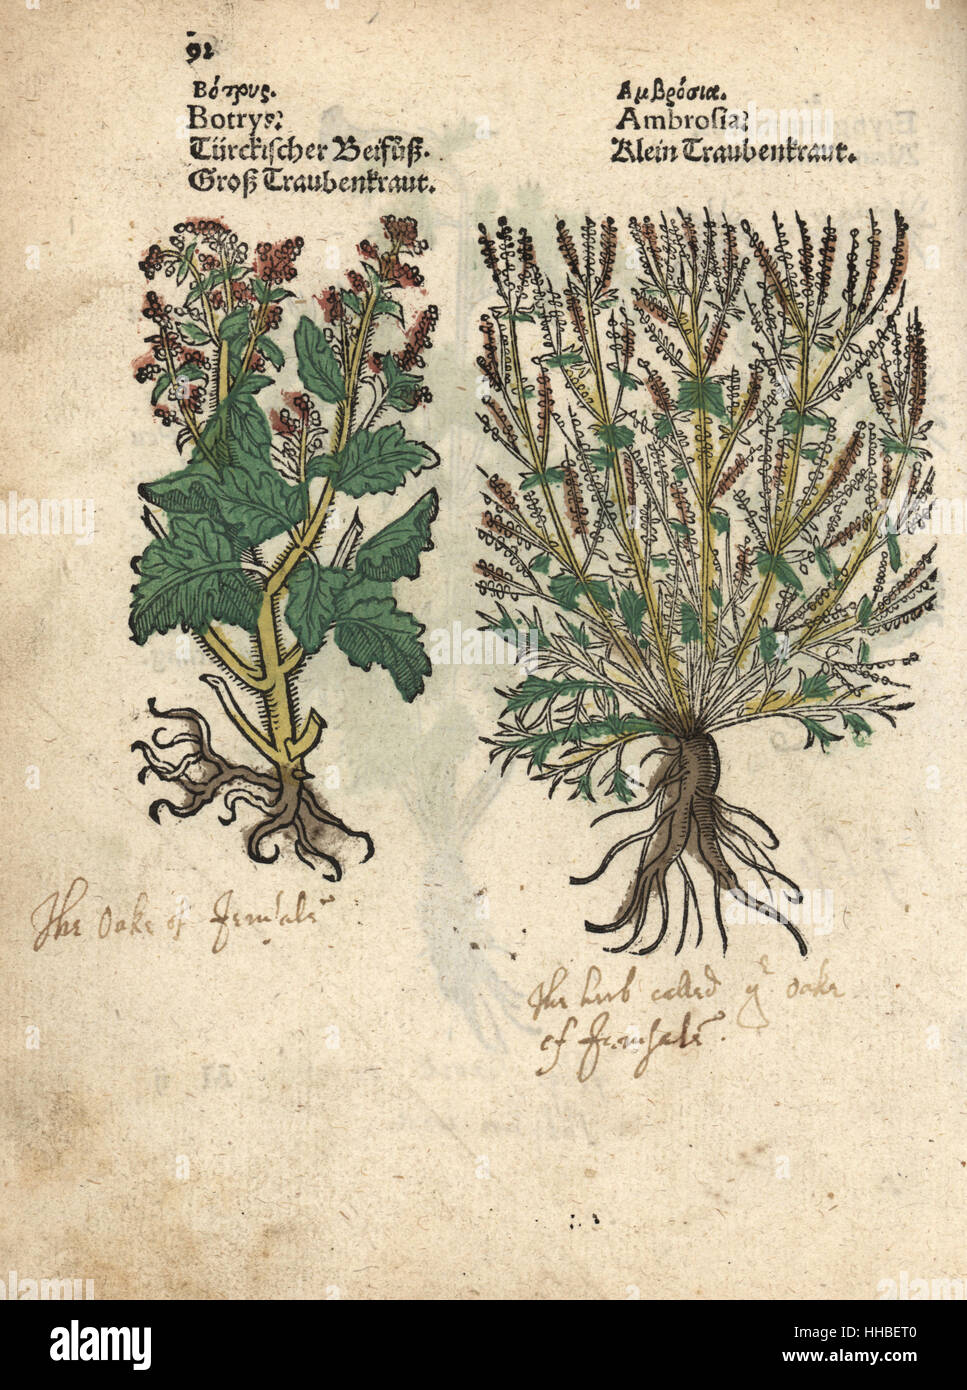 Long-beaked stork's bill, Erodium botrys, and bitterweed or ragwort, Ambrosia artemisiaefolia. Handcoloured woodblock engraving of a botanical illustration from Adam Lonicer's Krauterbuch, or Herbal, Frankfurt, 1557. This from a 17th century pirate edition or atlas of illustrations only, with captions in Latin, Greek, French, Italian, German, and in English manuscript. Stock Photo